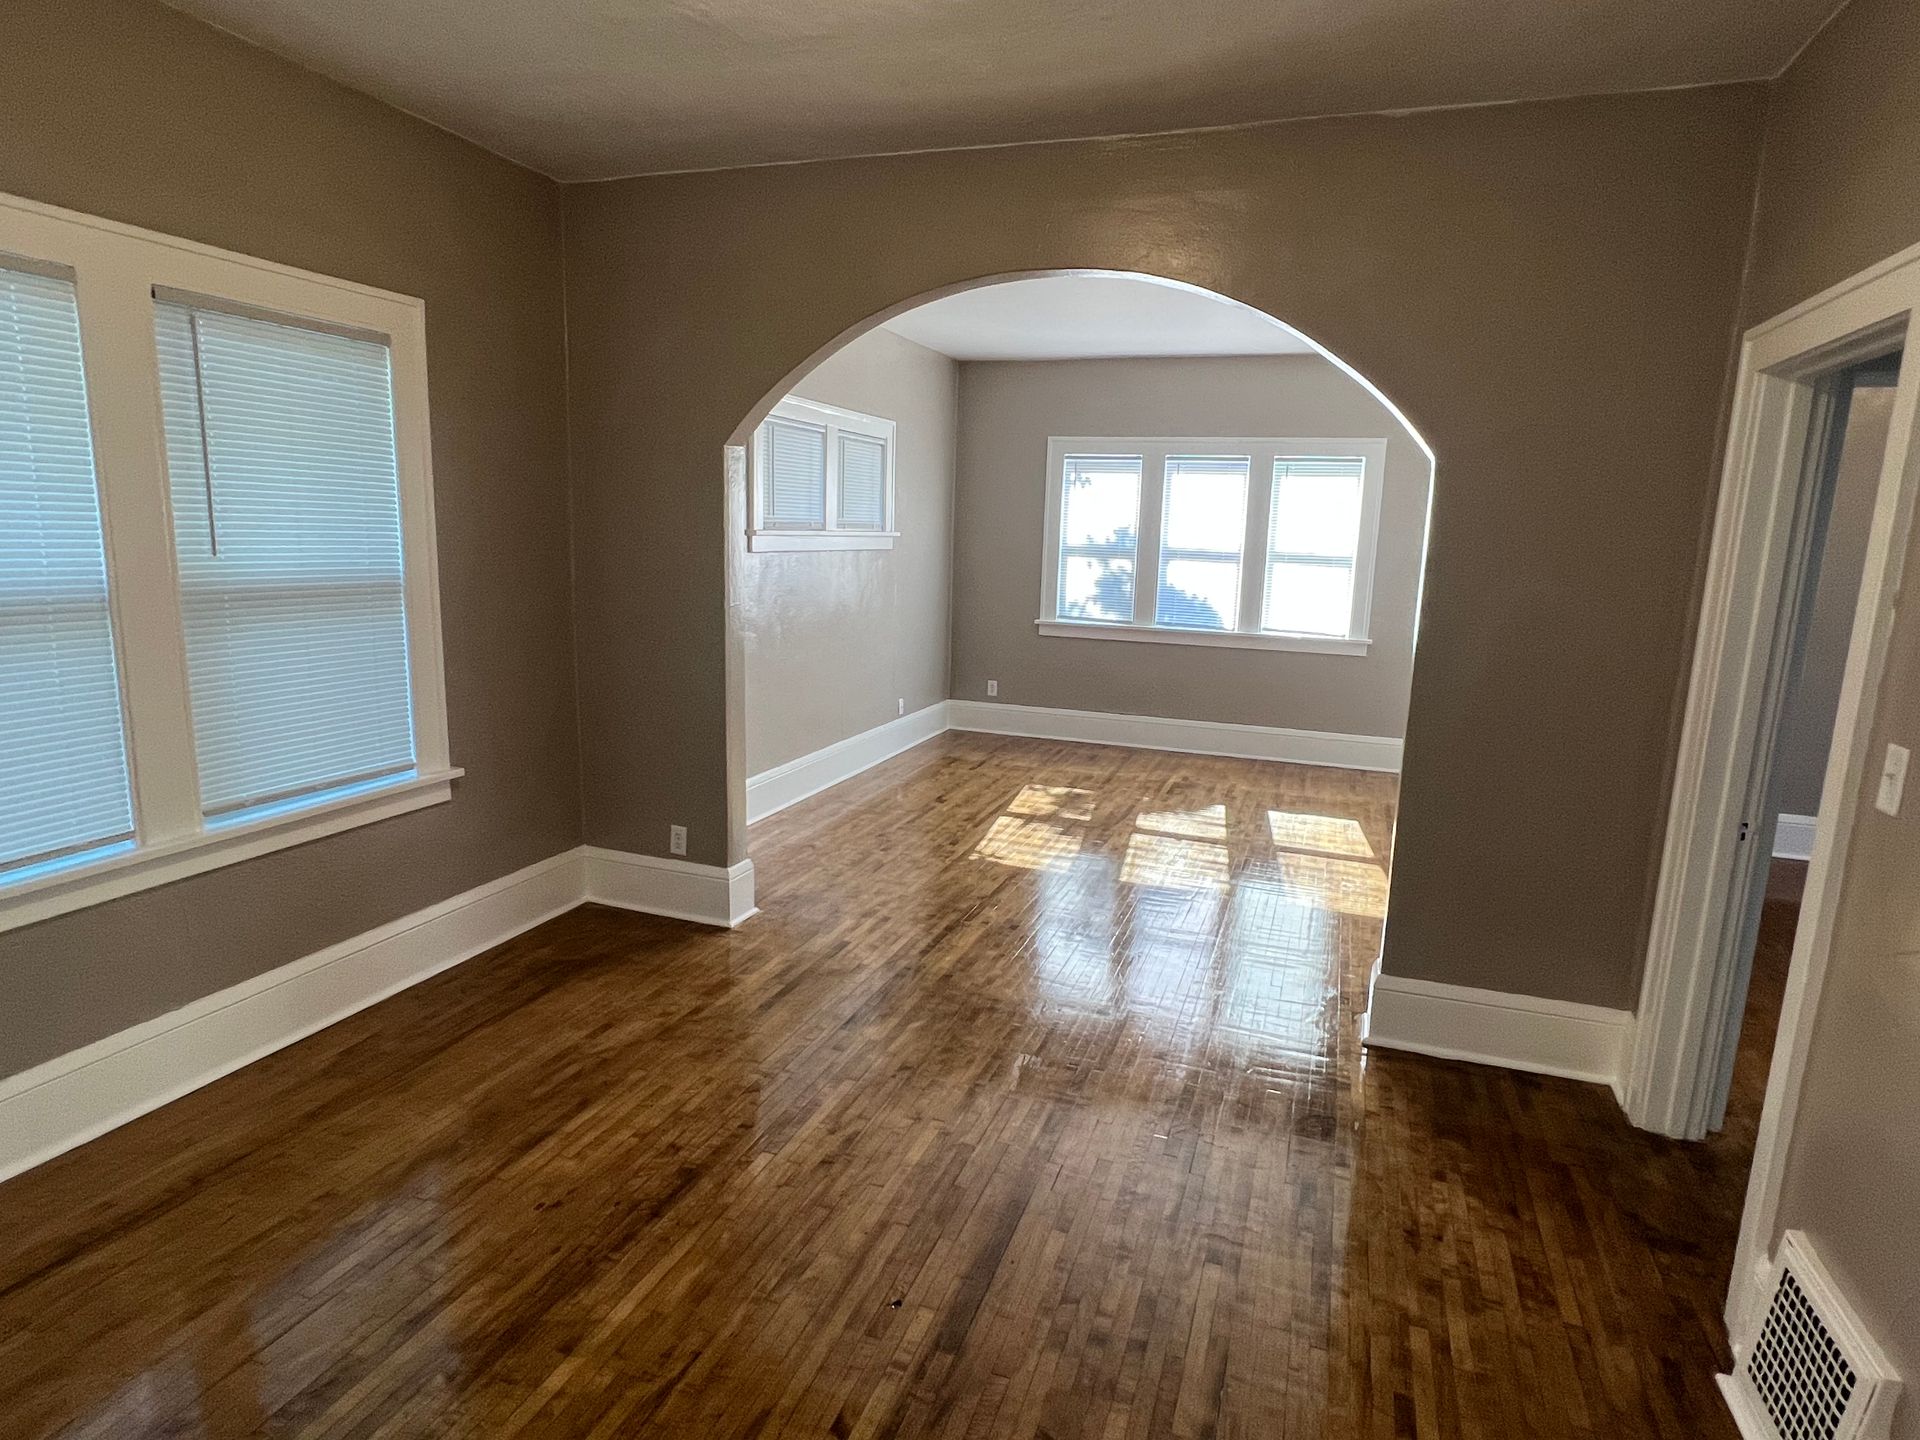 An empty living room with hardwood floors and a window.